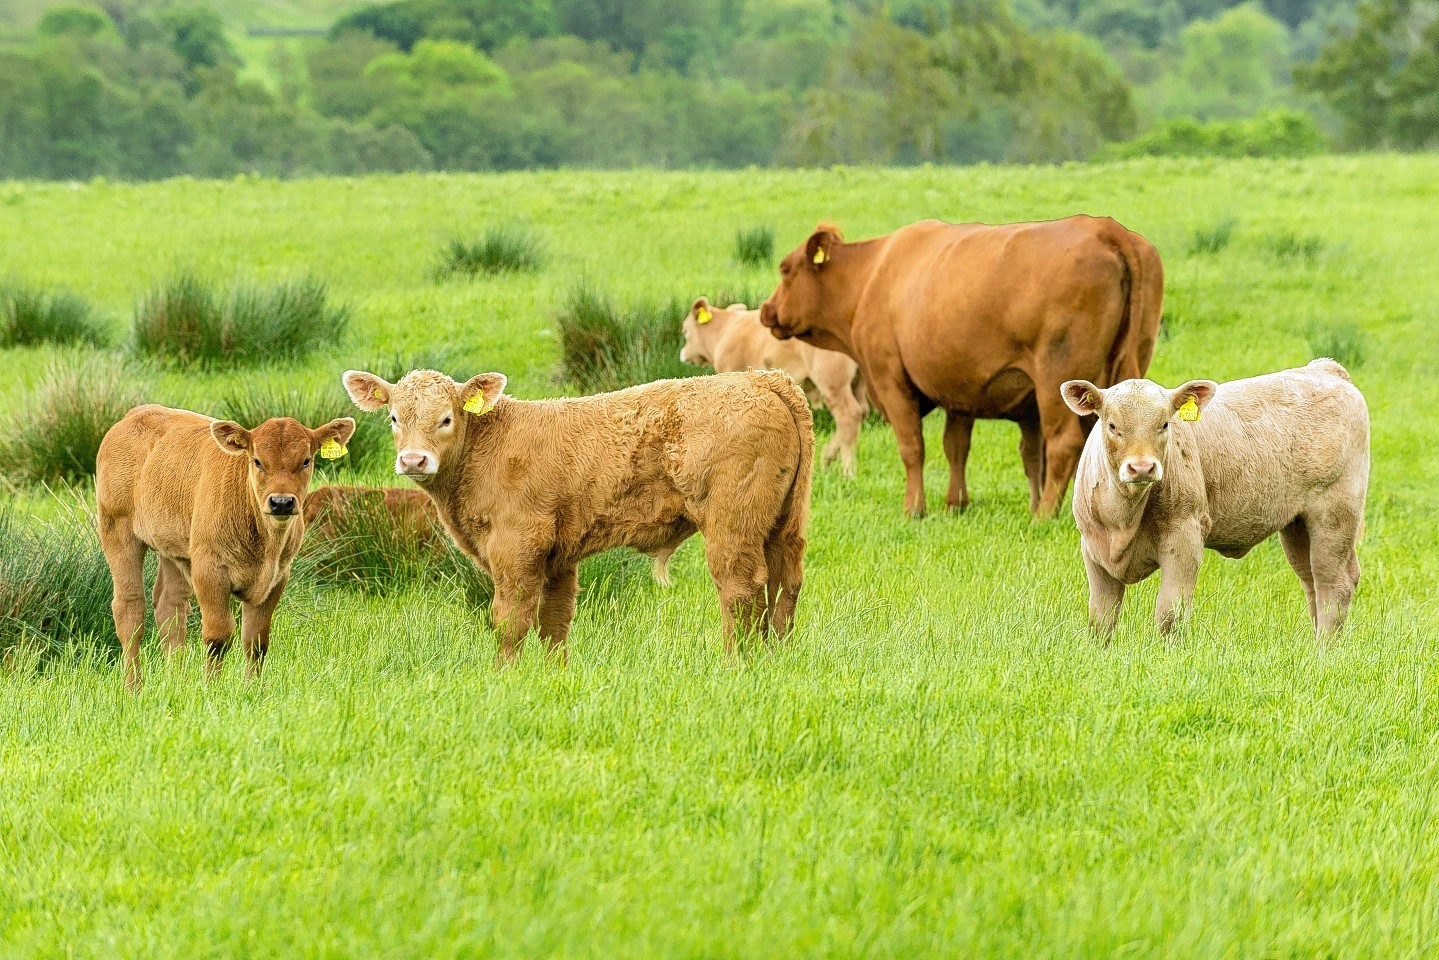 Funding is available for livestock health and welfare projects